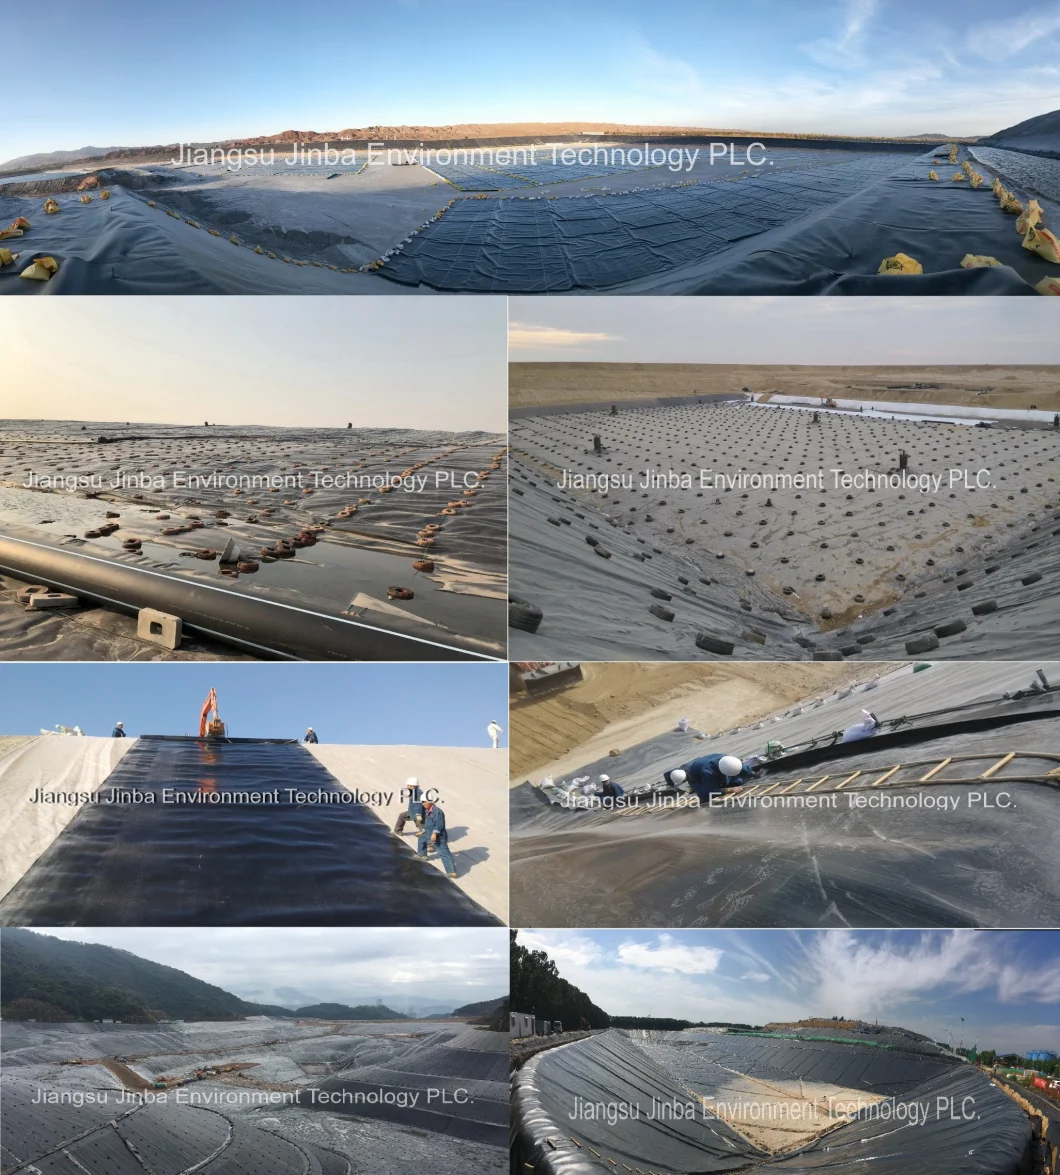 Thickness 0.50 - 3.00 mm Anti-Seepage Impermeable Impervious Double-Sided Smooth / Texture HDPE Geomembrane for Environmental Protection